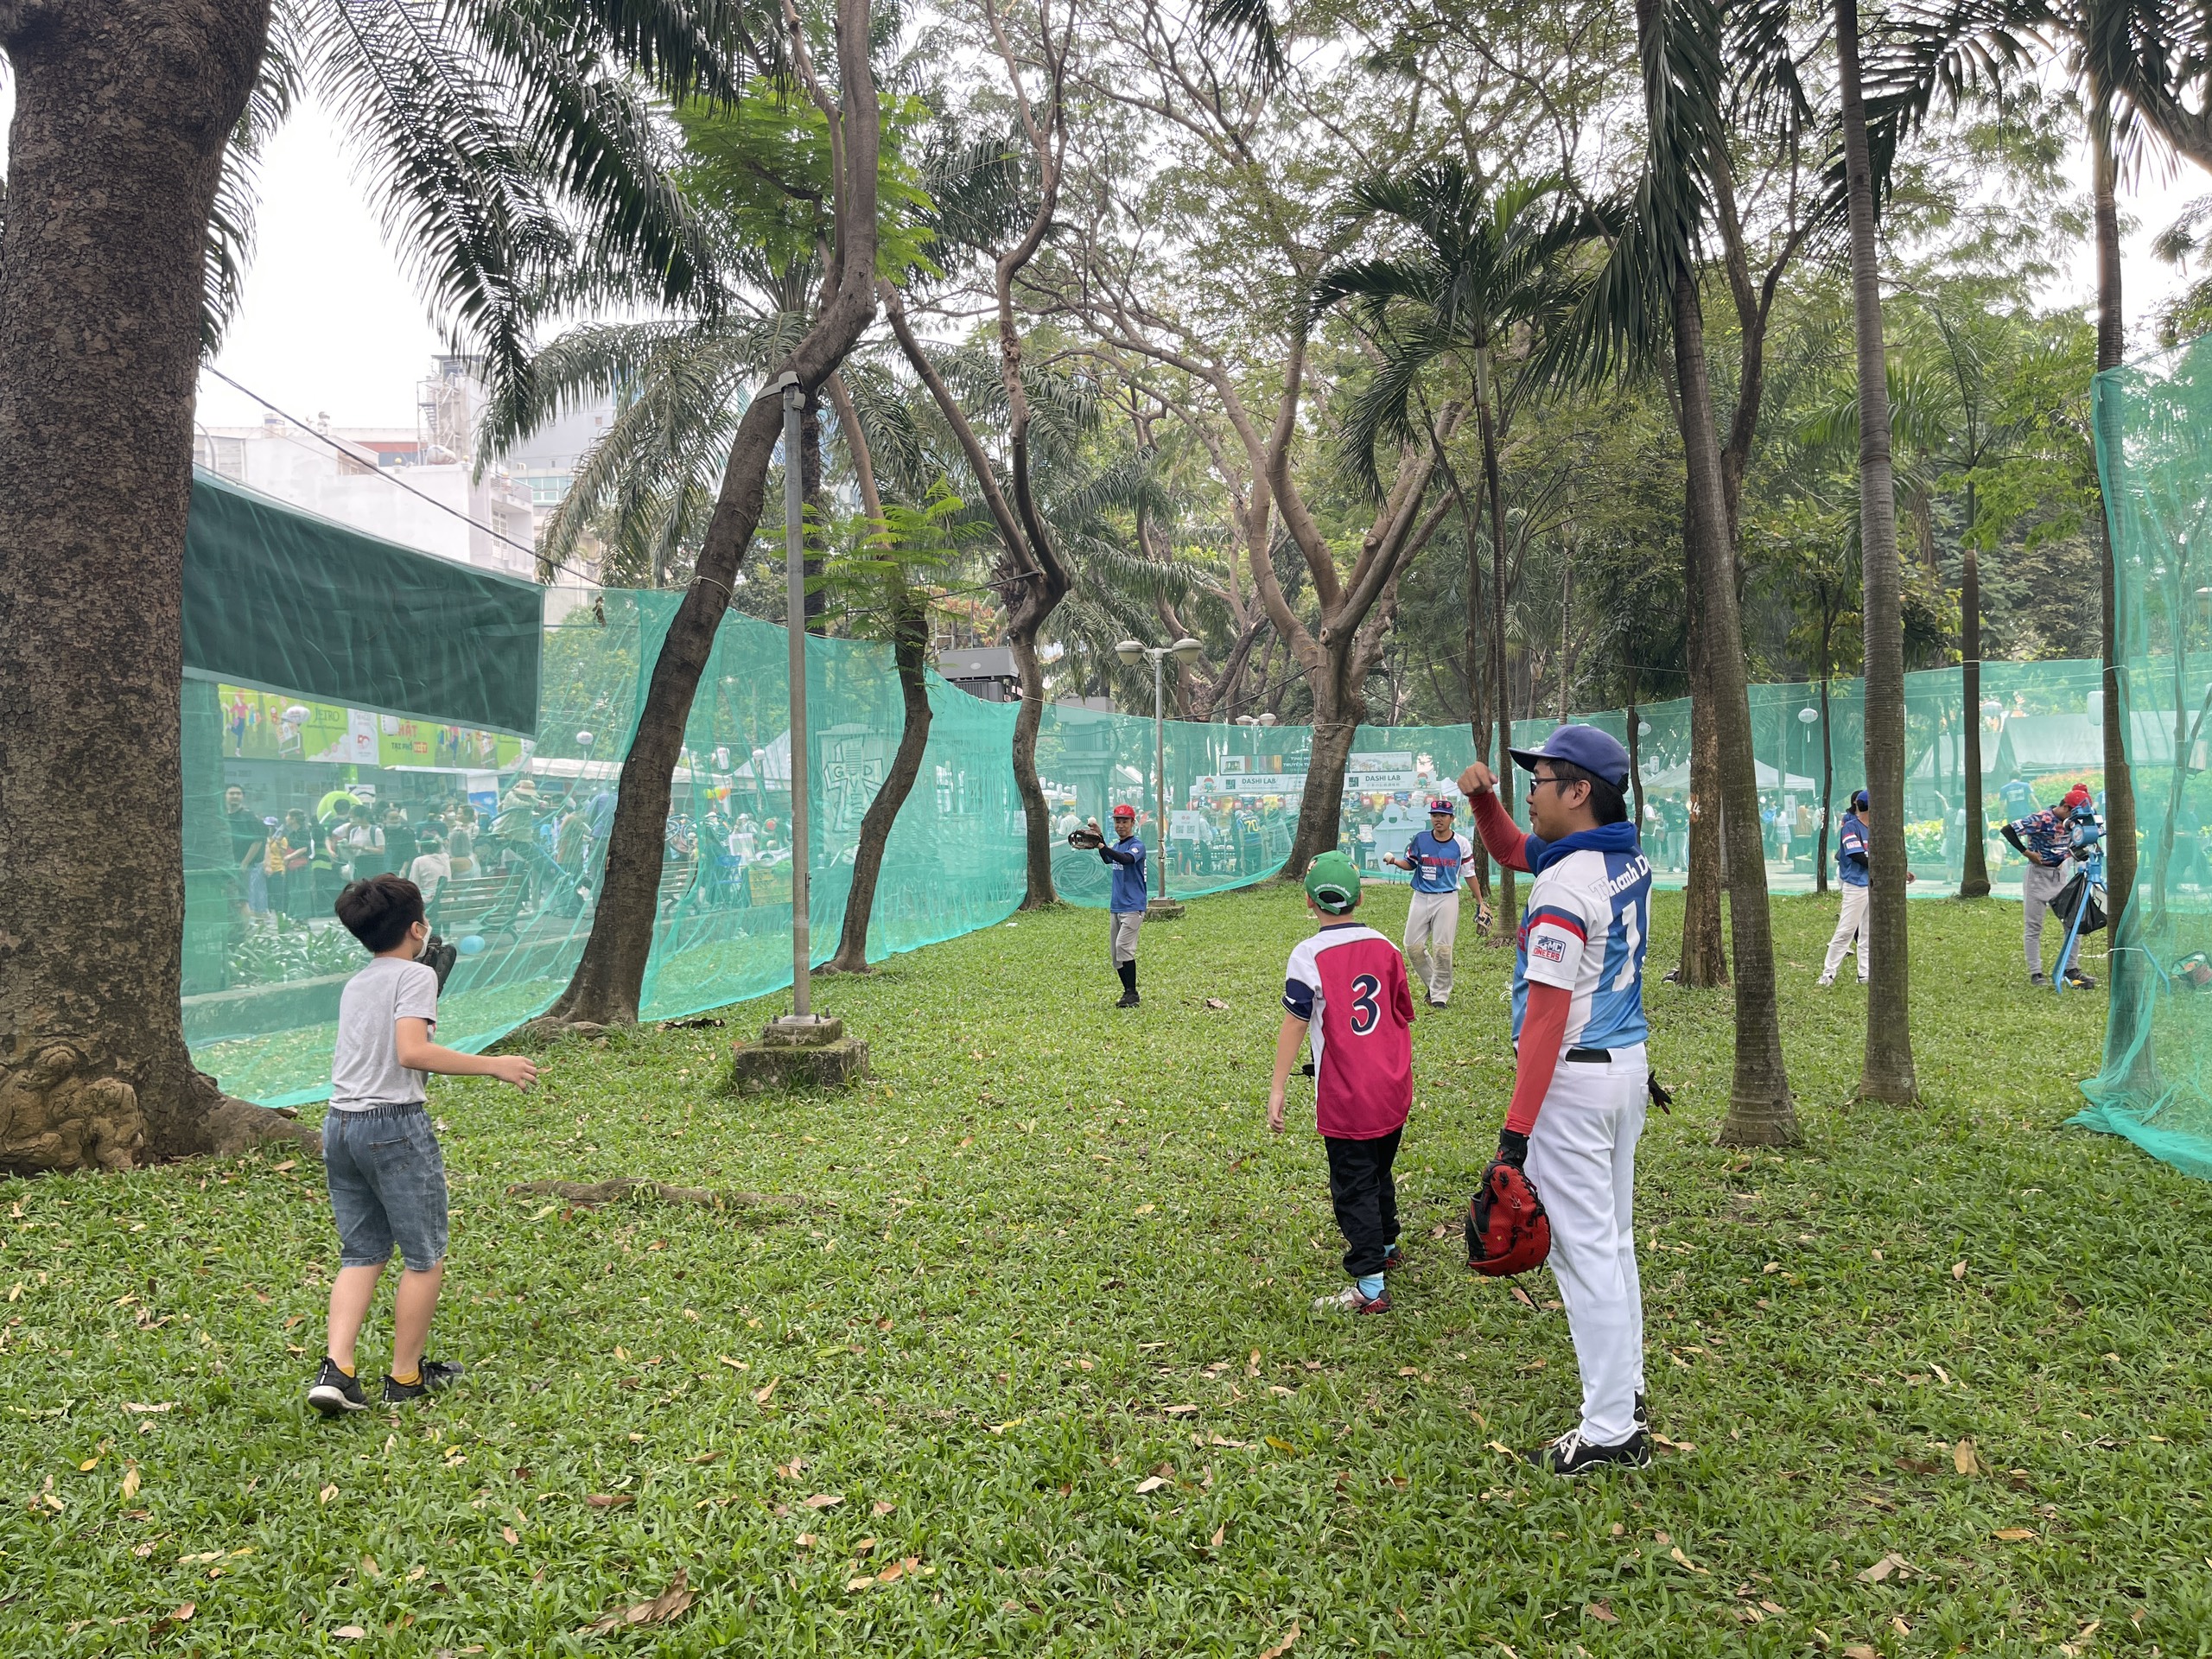 Children experience baseball at the eighth Japan Vietnam Festival in Ho Chi Minh City, February 25, 2023. Photo: Dong Nguyen / Tuoi Tre News